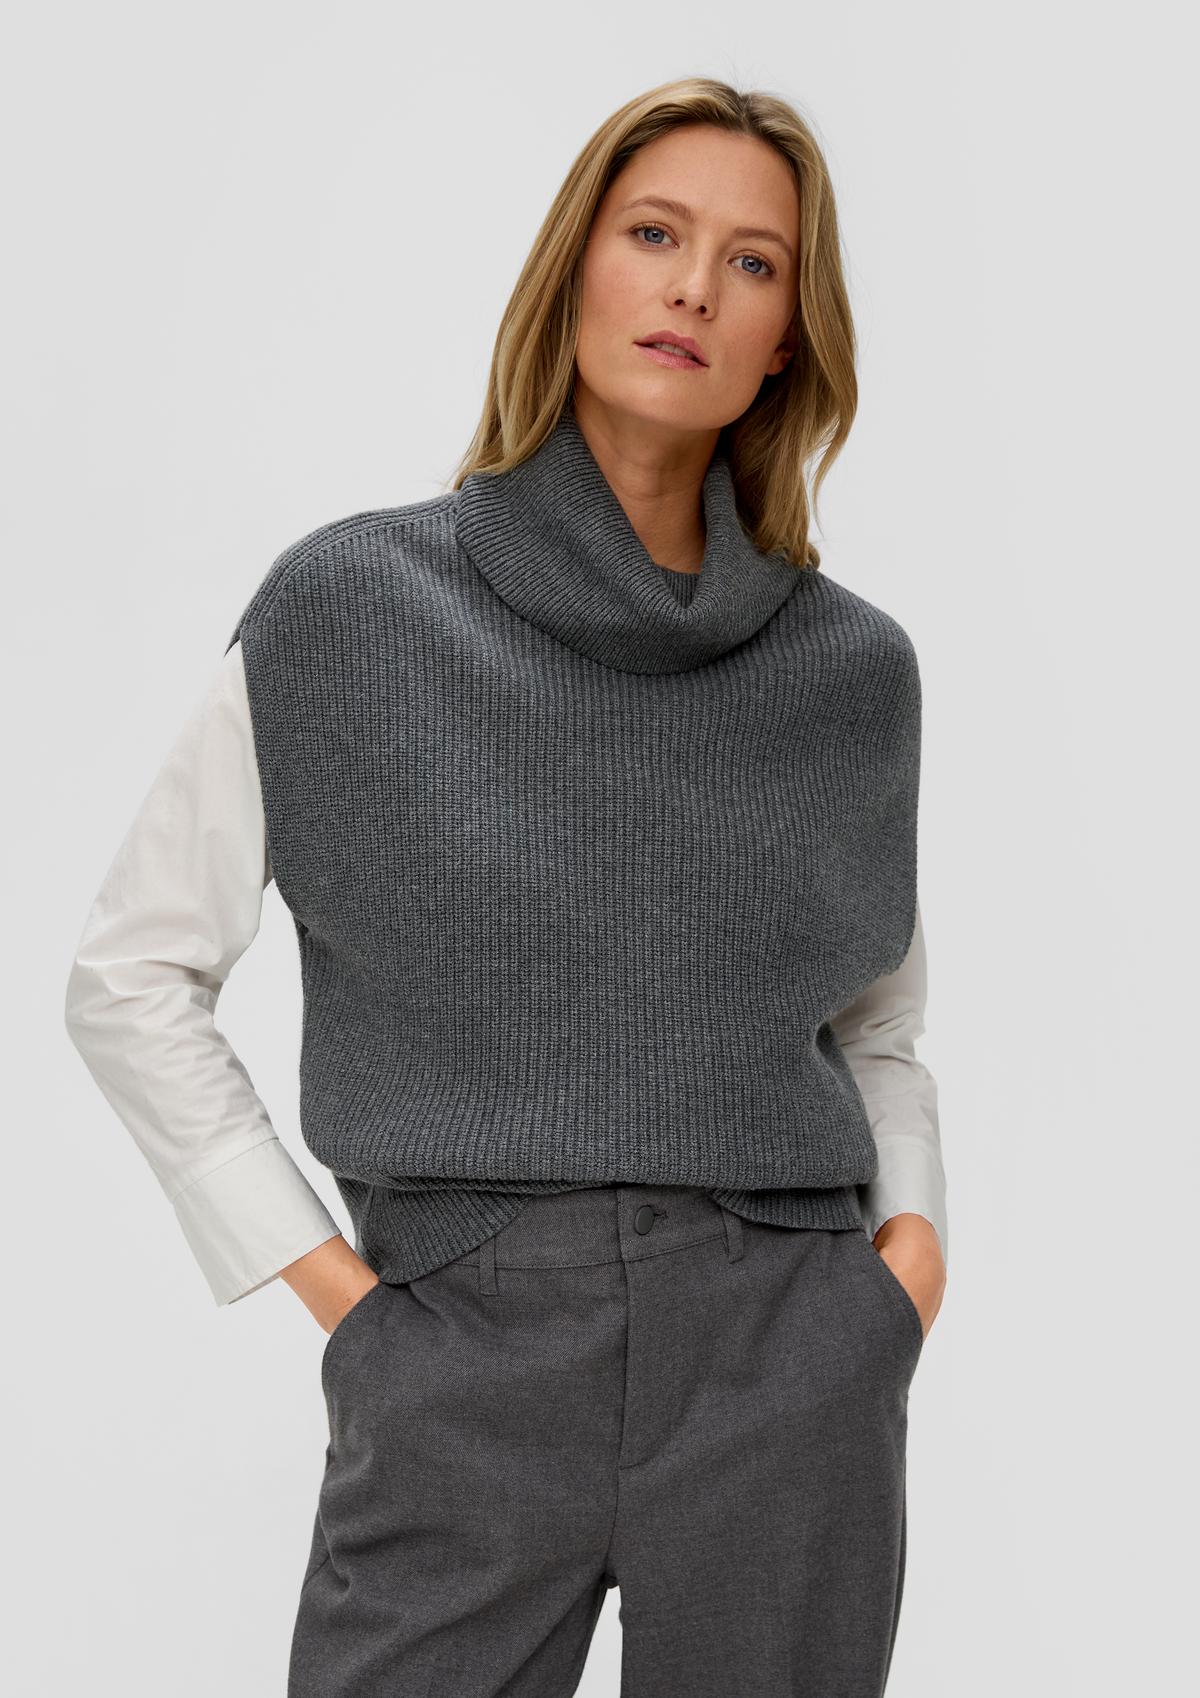 Sleeveless knitted jumper with a polo neck